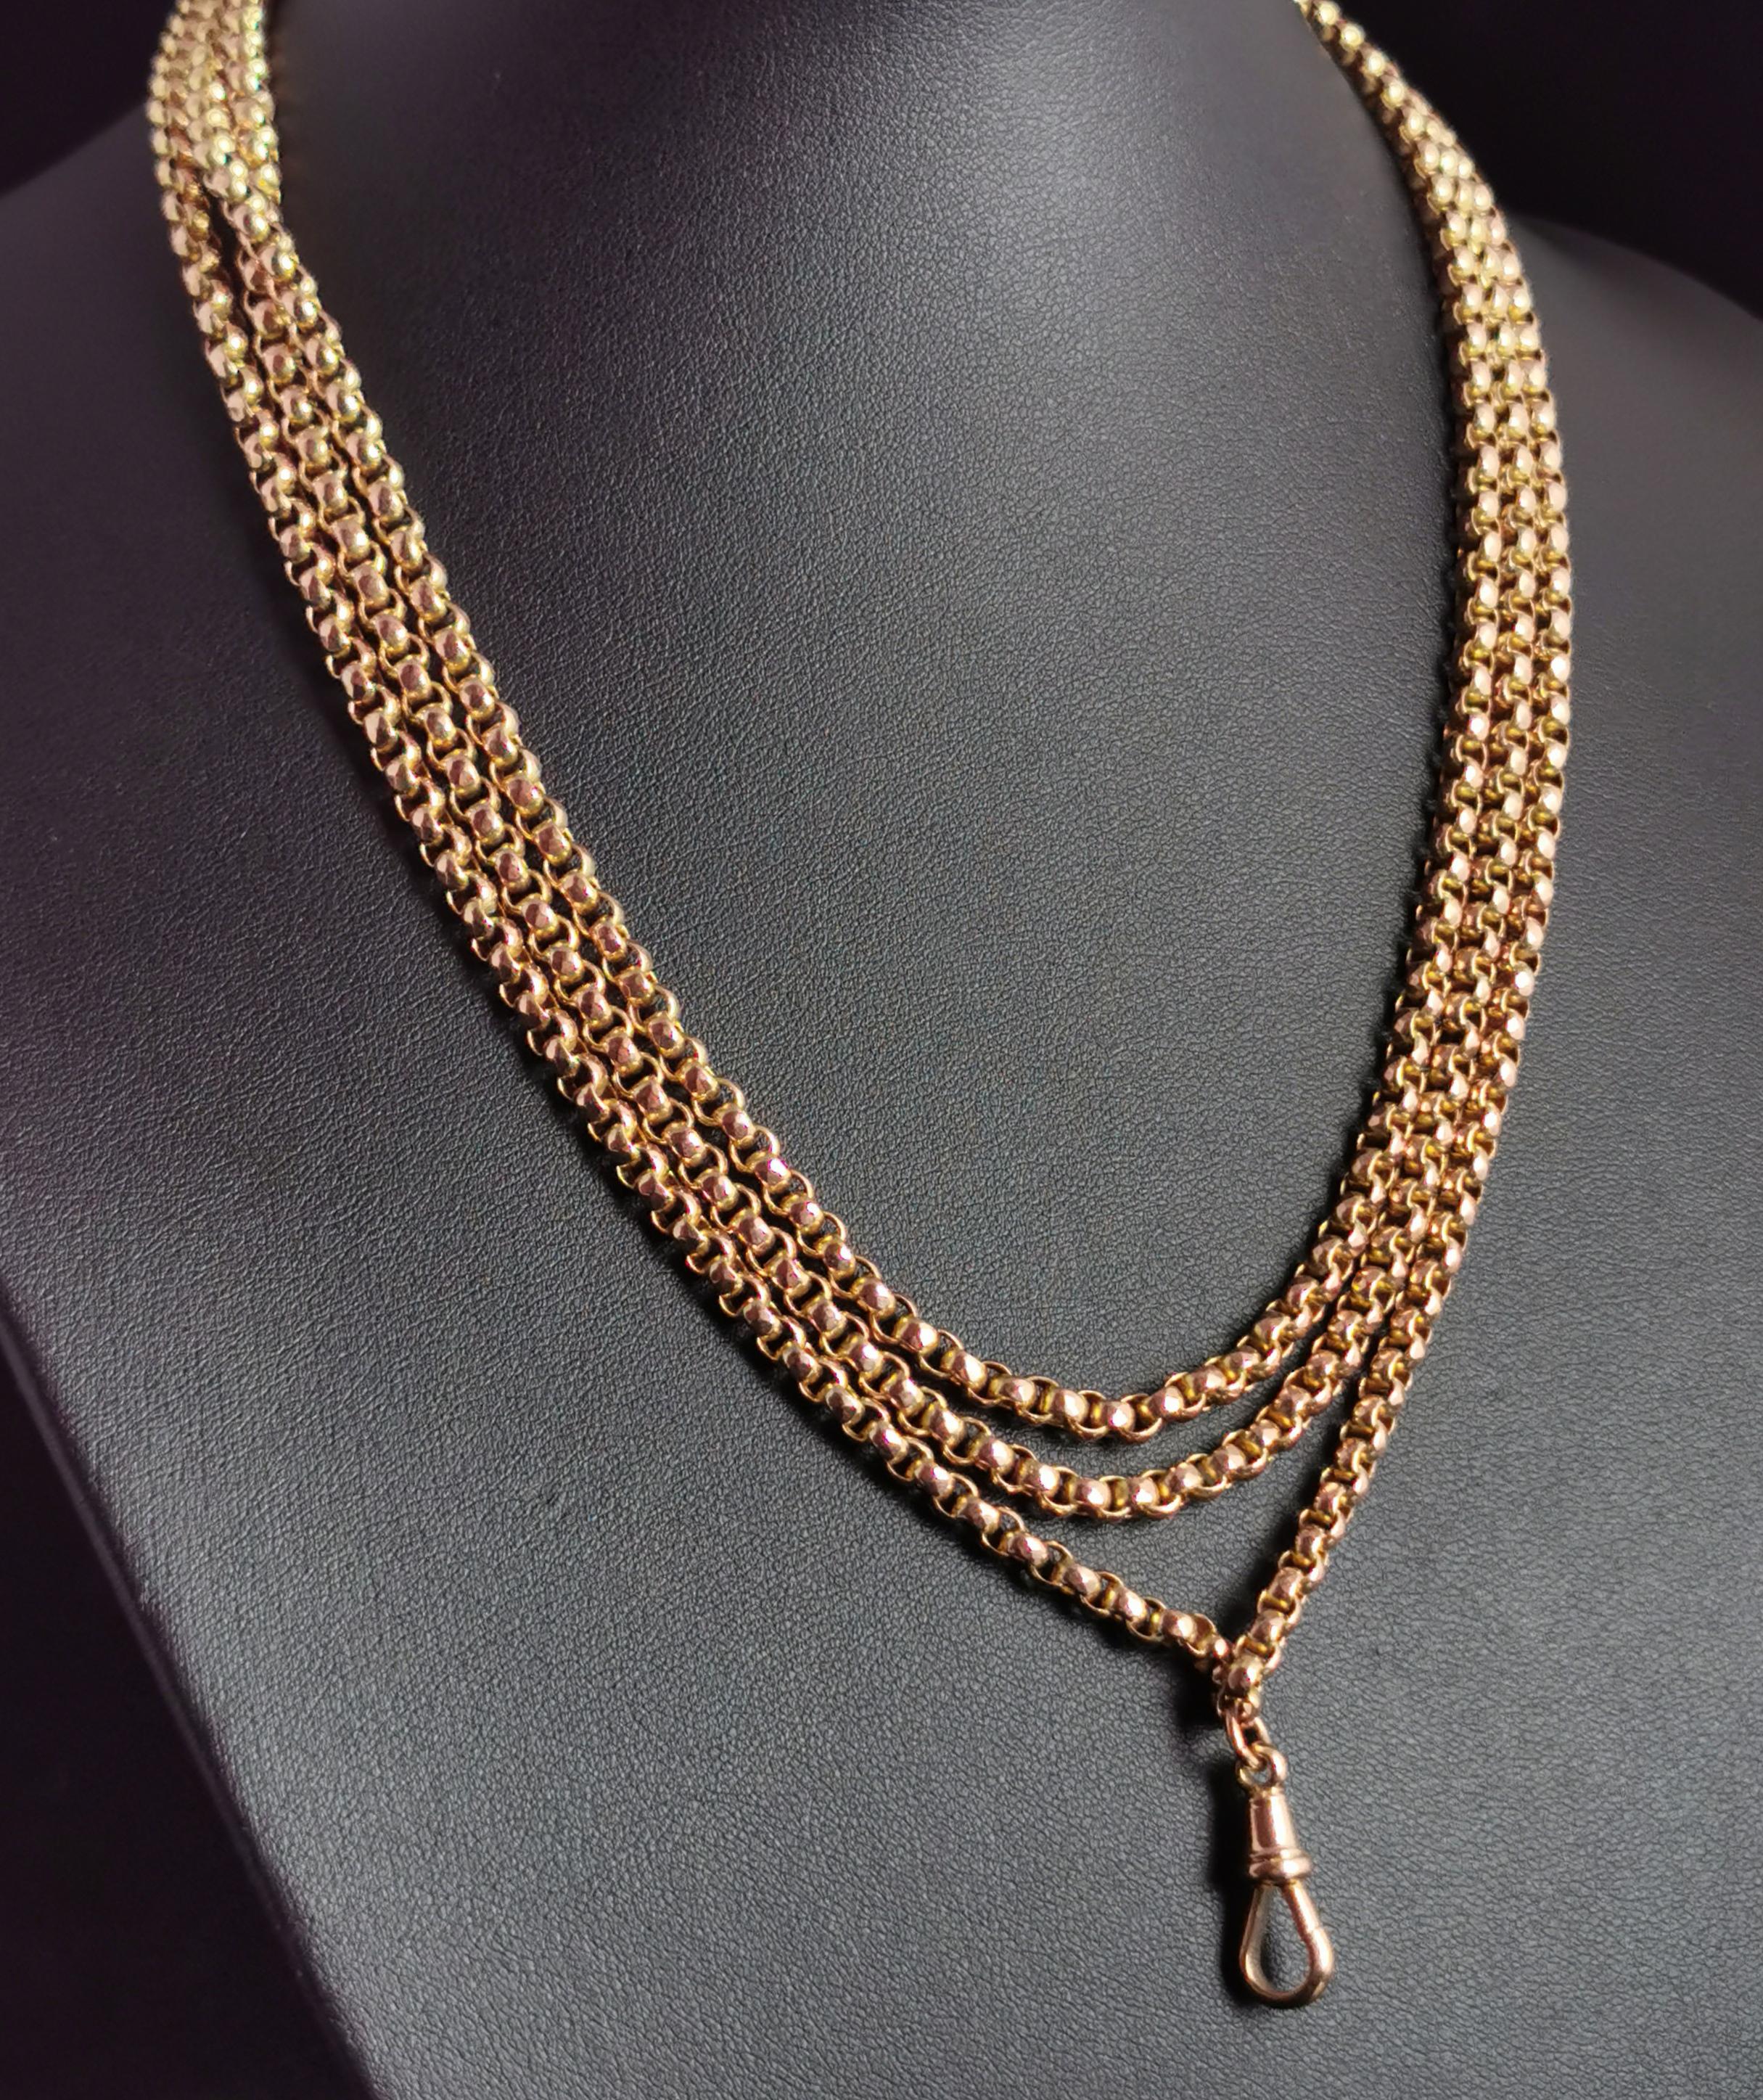 Antique 9k Yellow Gold Longuard Chain Necklace, Muff Chain, Victorian 8